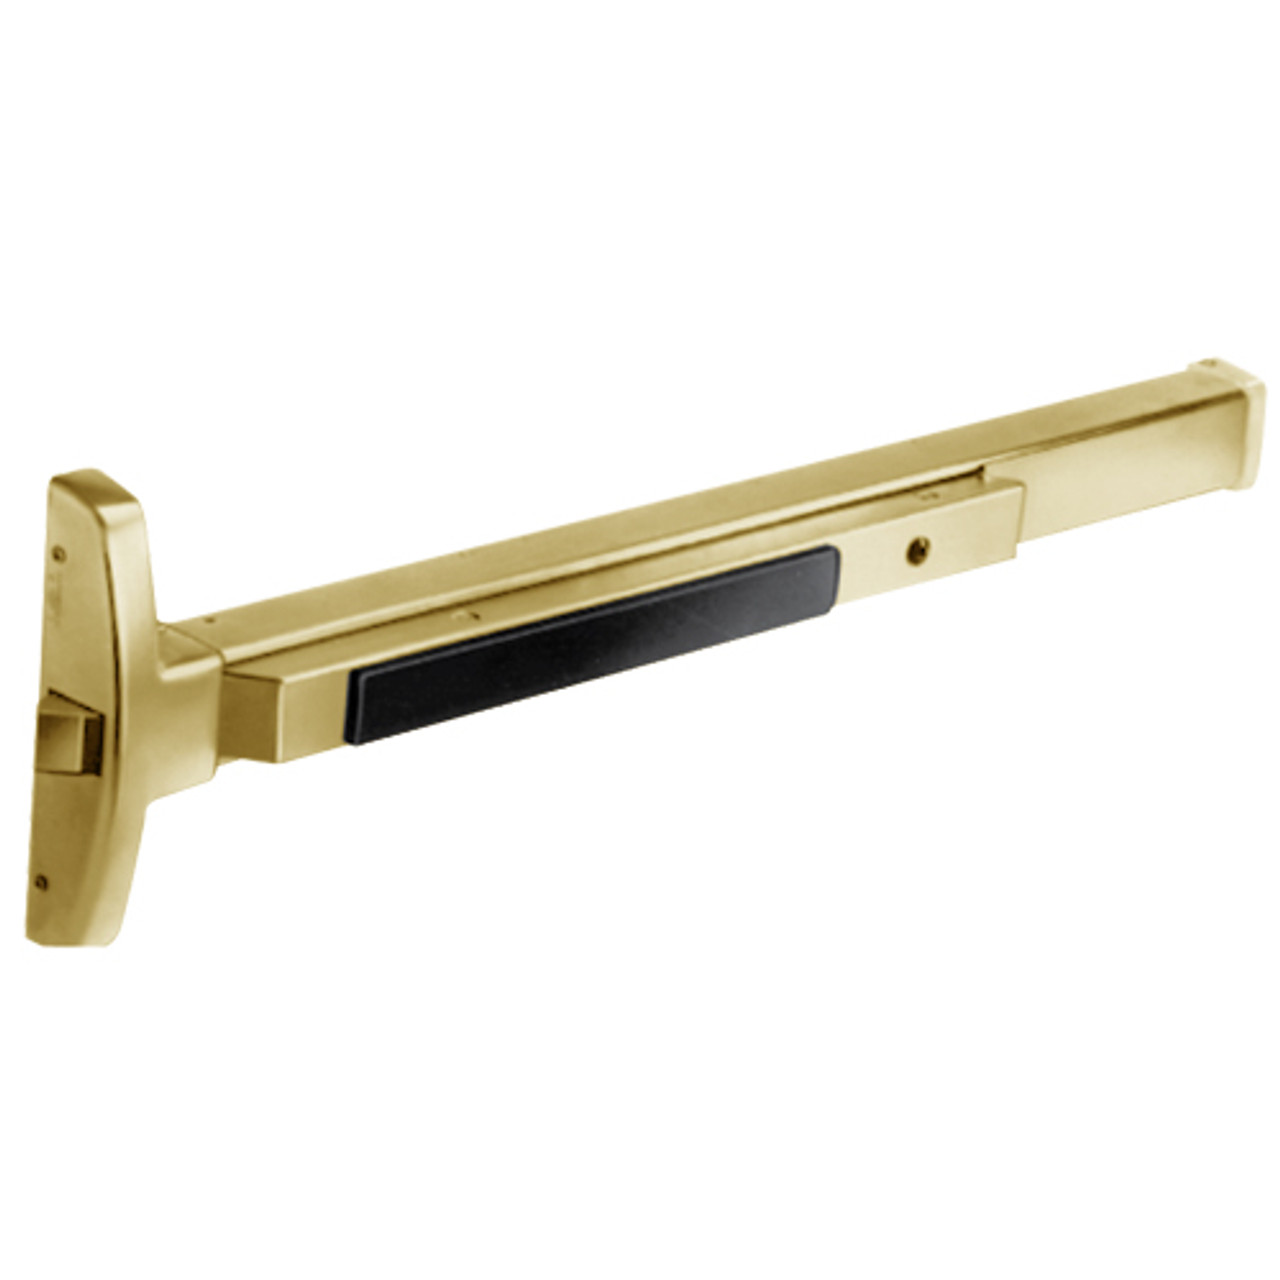 8510F-LHR-03 Sargent 80 Series Exit Only Narrow Stile Rim Exit Device in Bright Brass